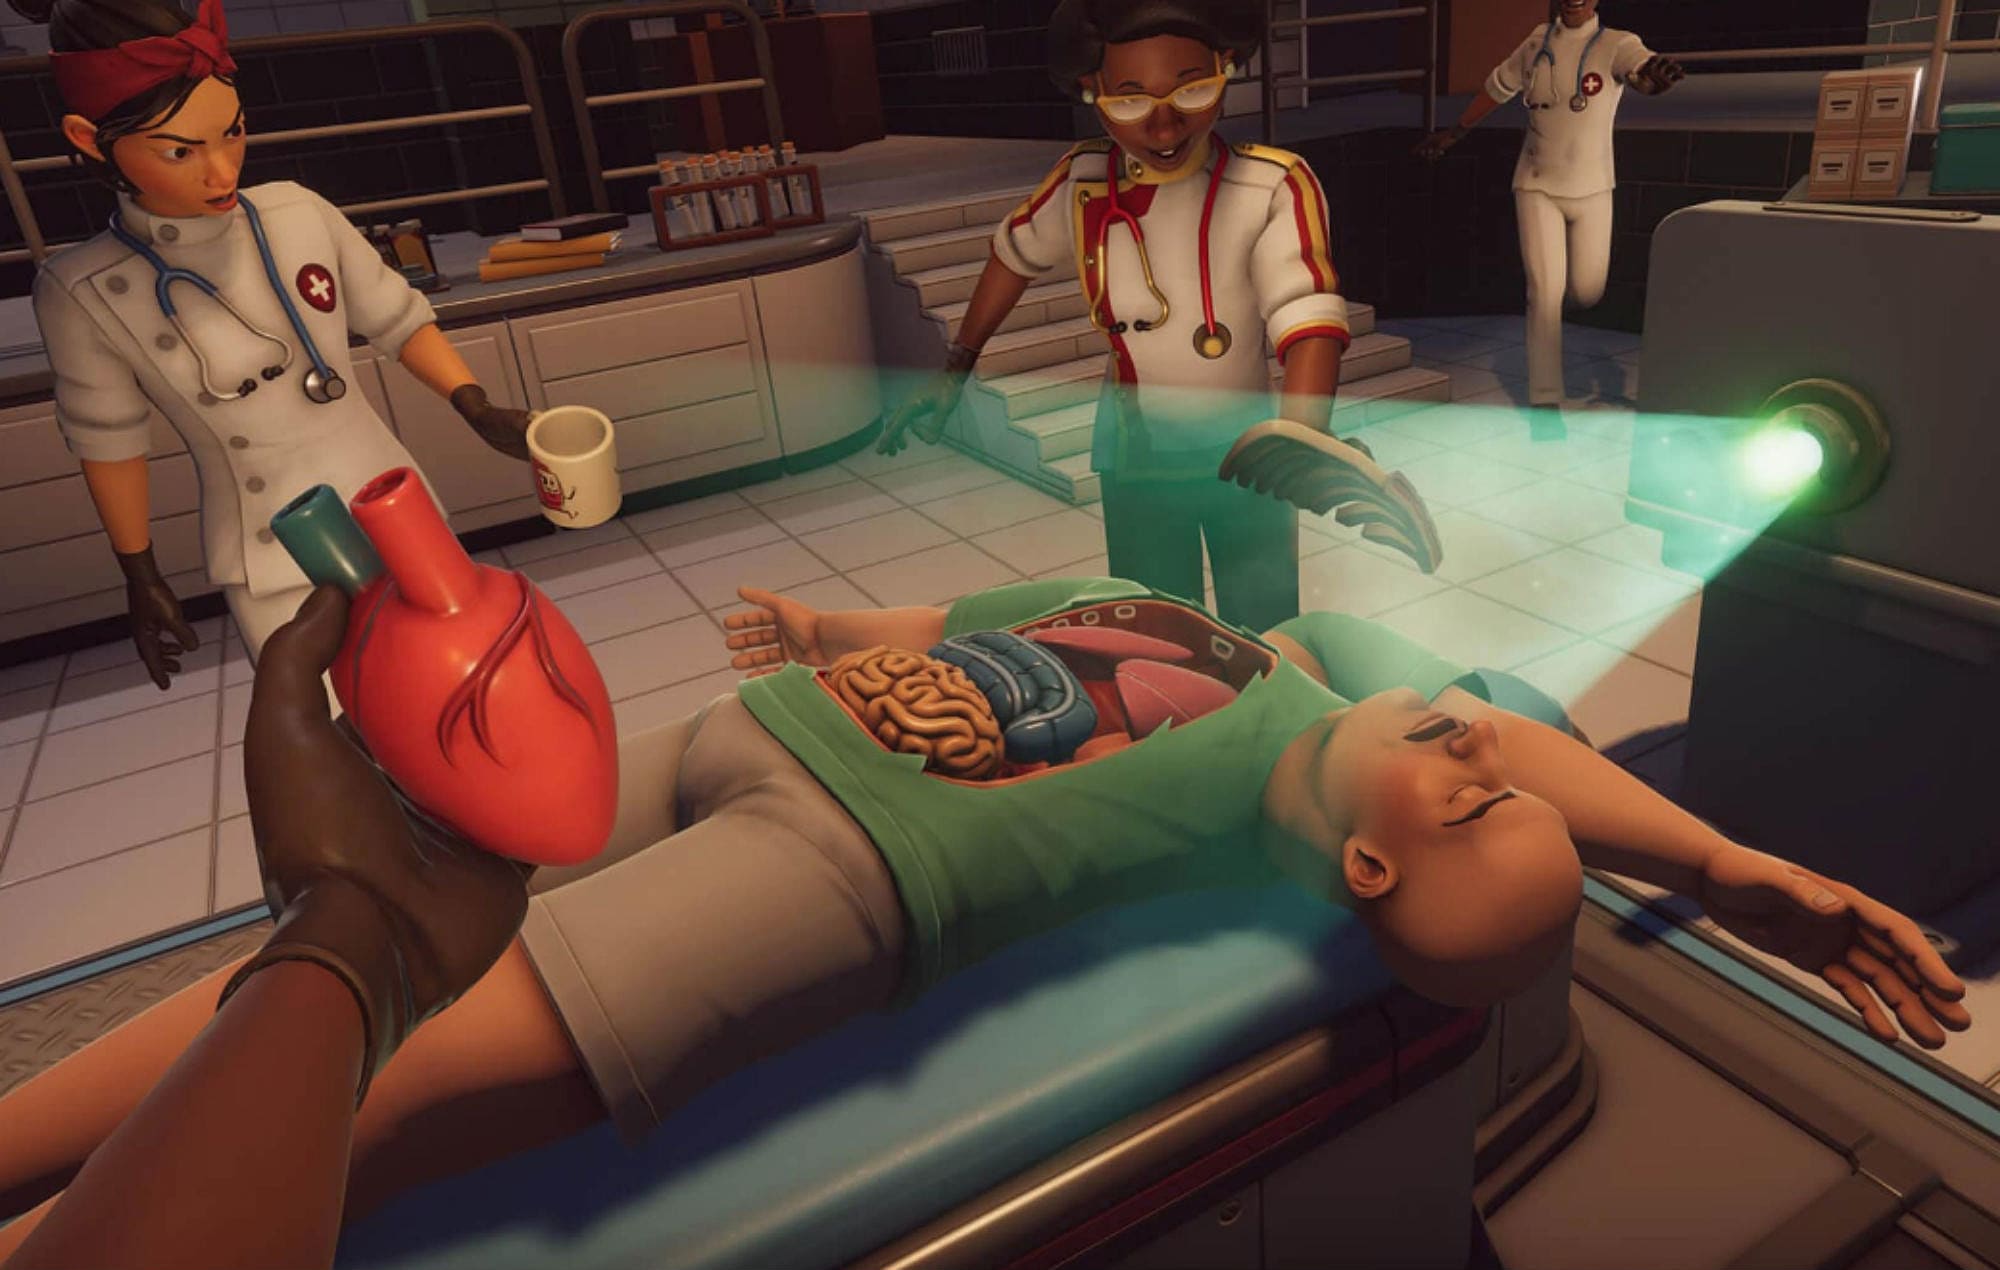 Surgeon Simulator 2 Review I Got A Fever In My Bones Surgeon Simulator 2 - roblox game with swappable limbs that you build